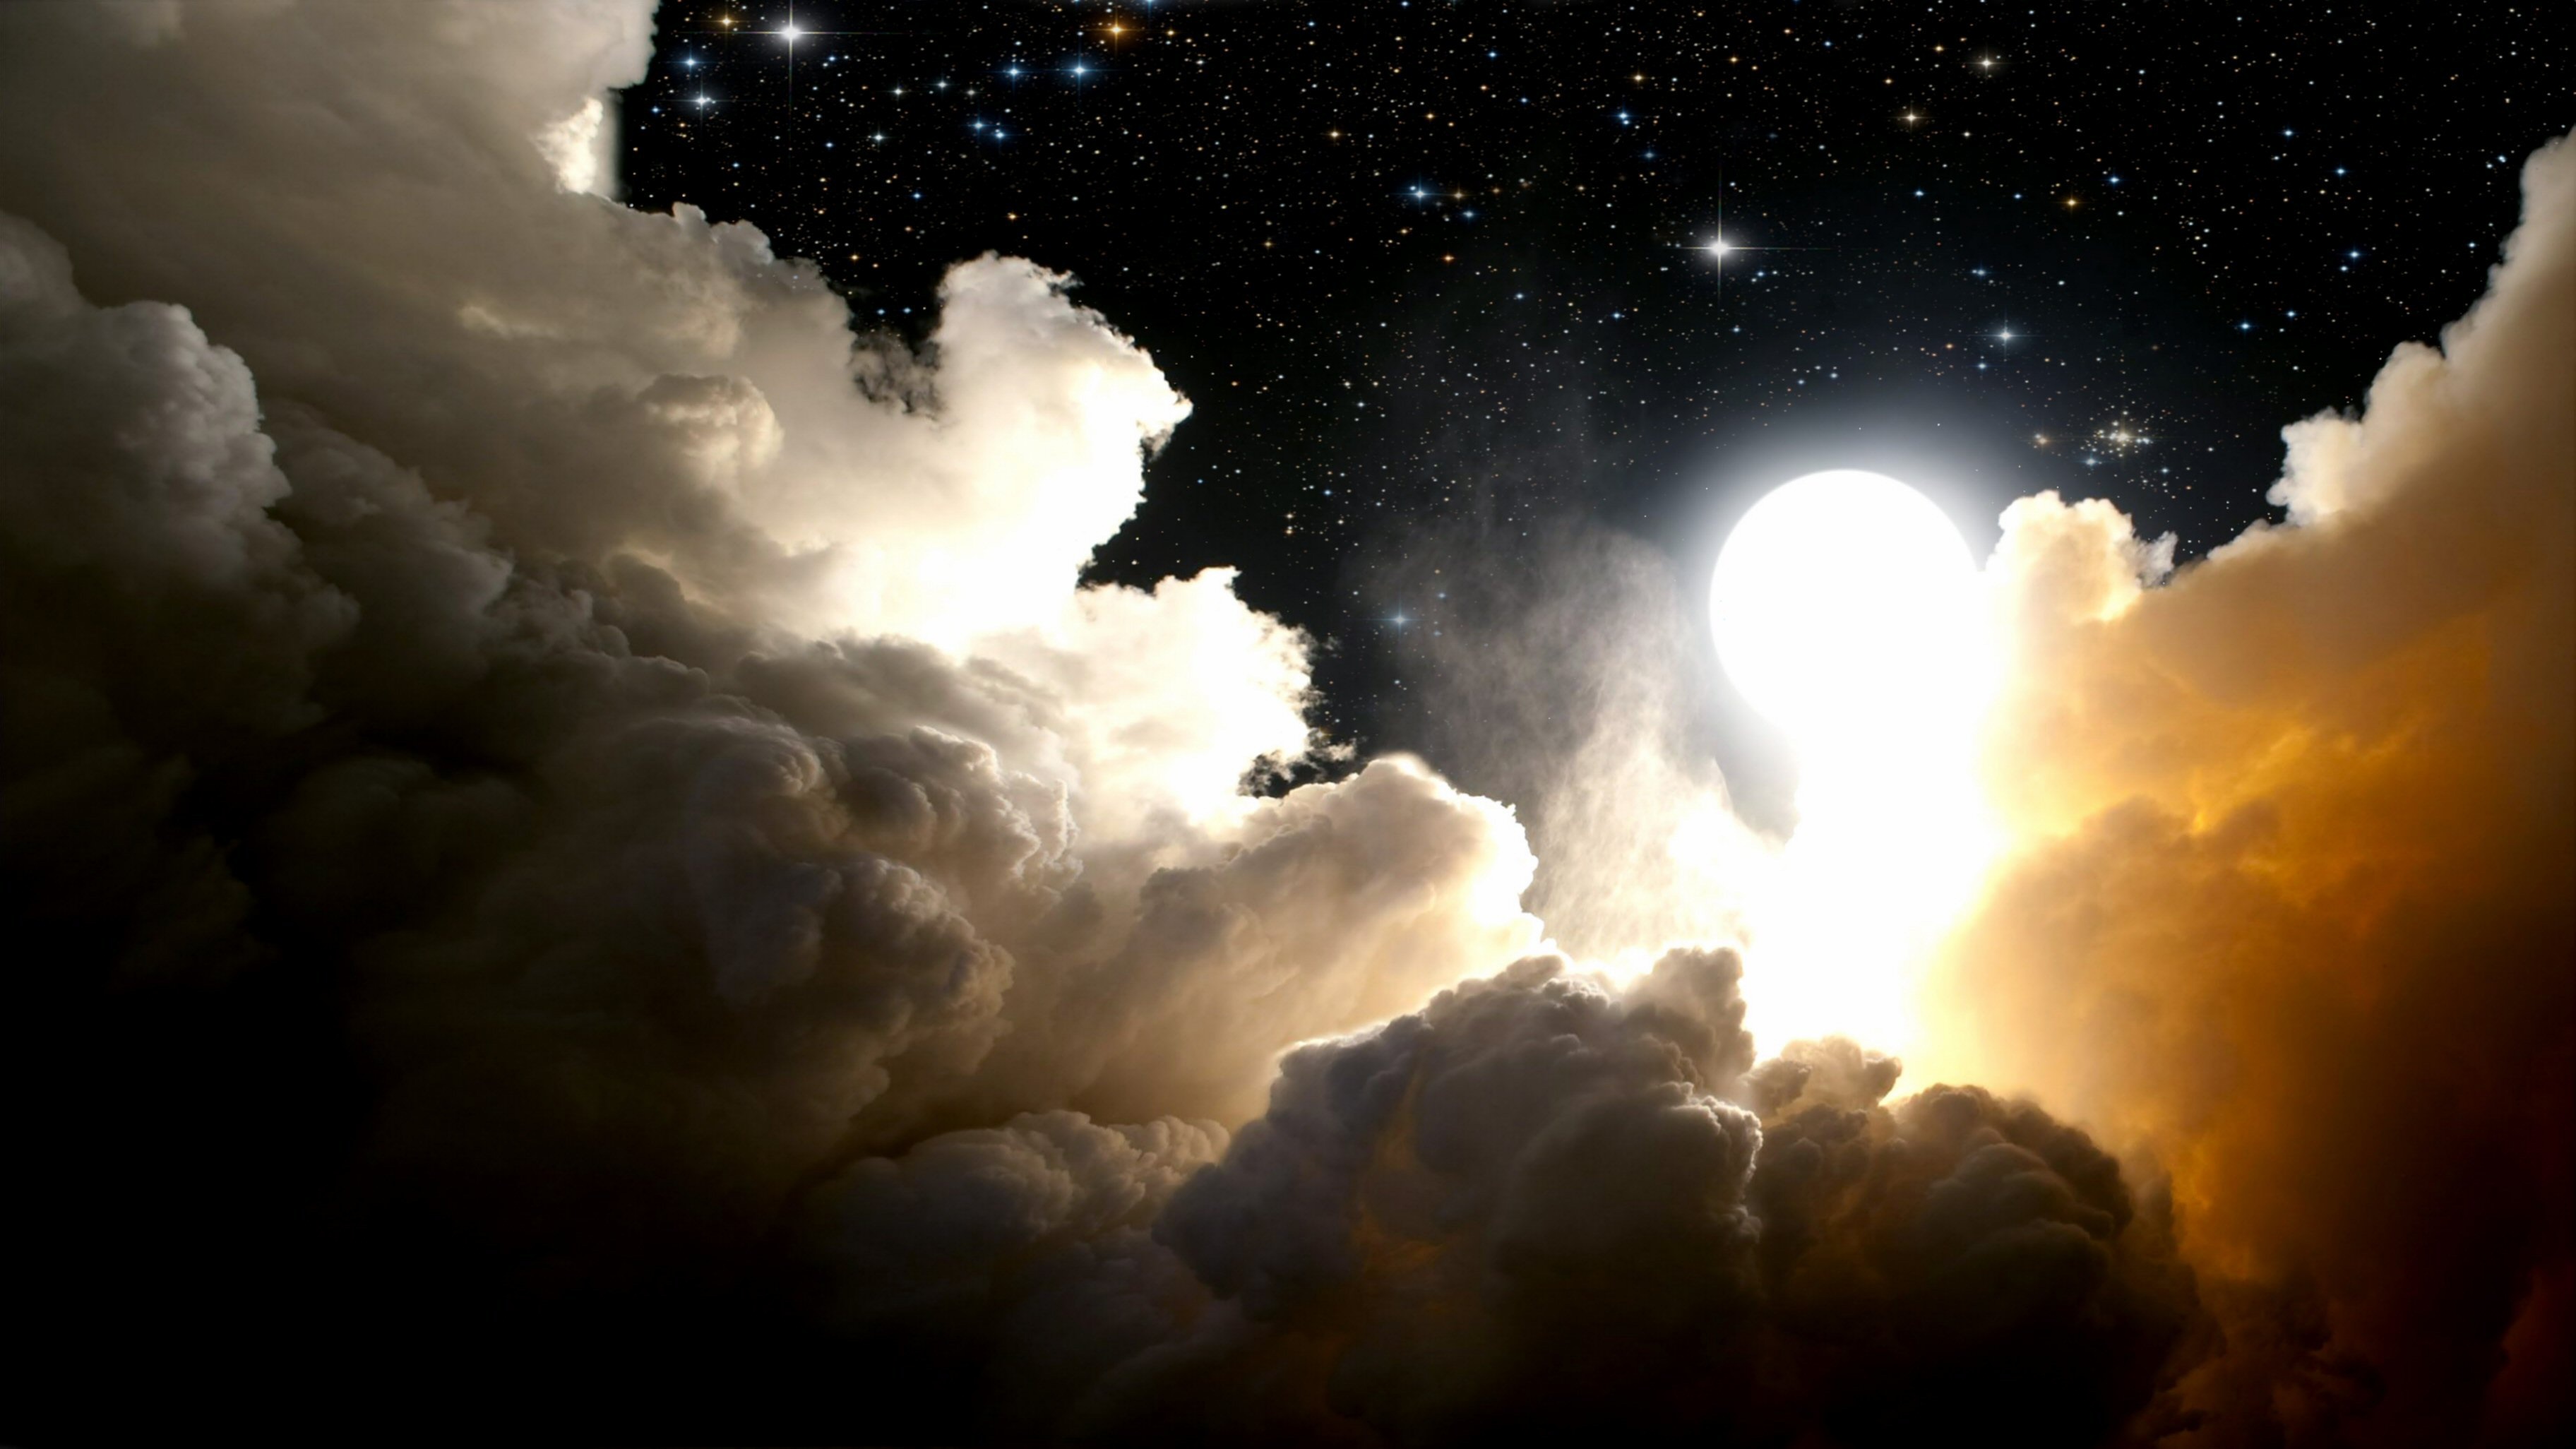 Beyond The Clouds - Clear Night Sky With Clouds - HD Wallpaper 